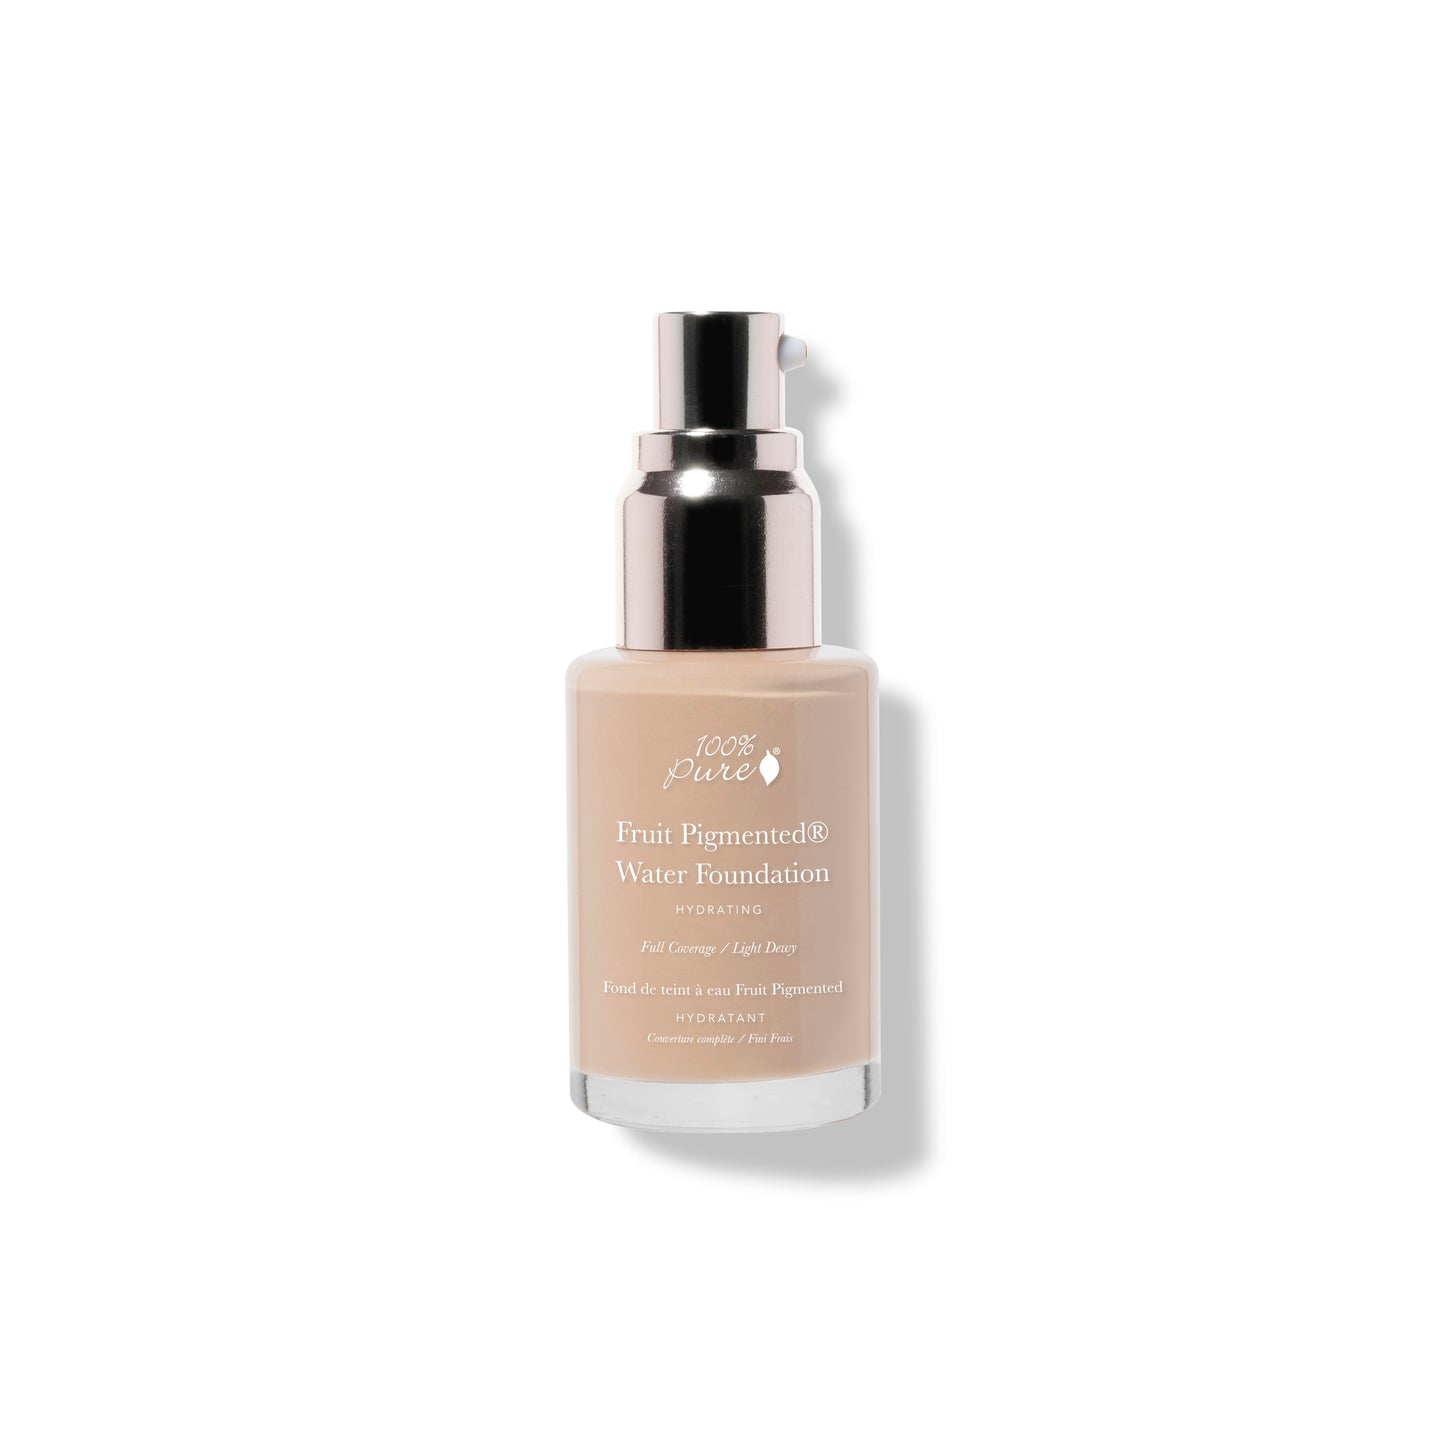 100% PURE Fruit Pigmented Full Coverage Water Foundation warm 3.0